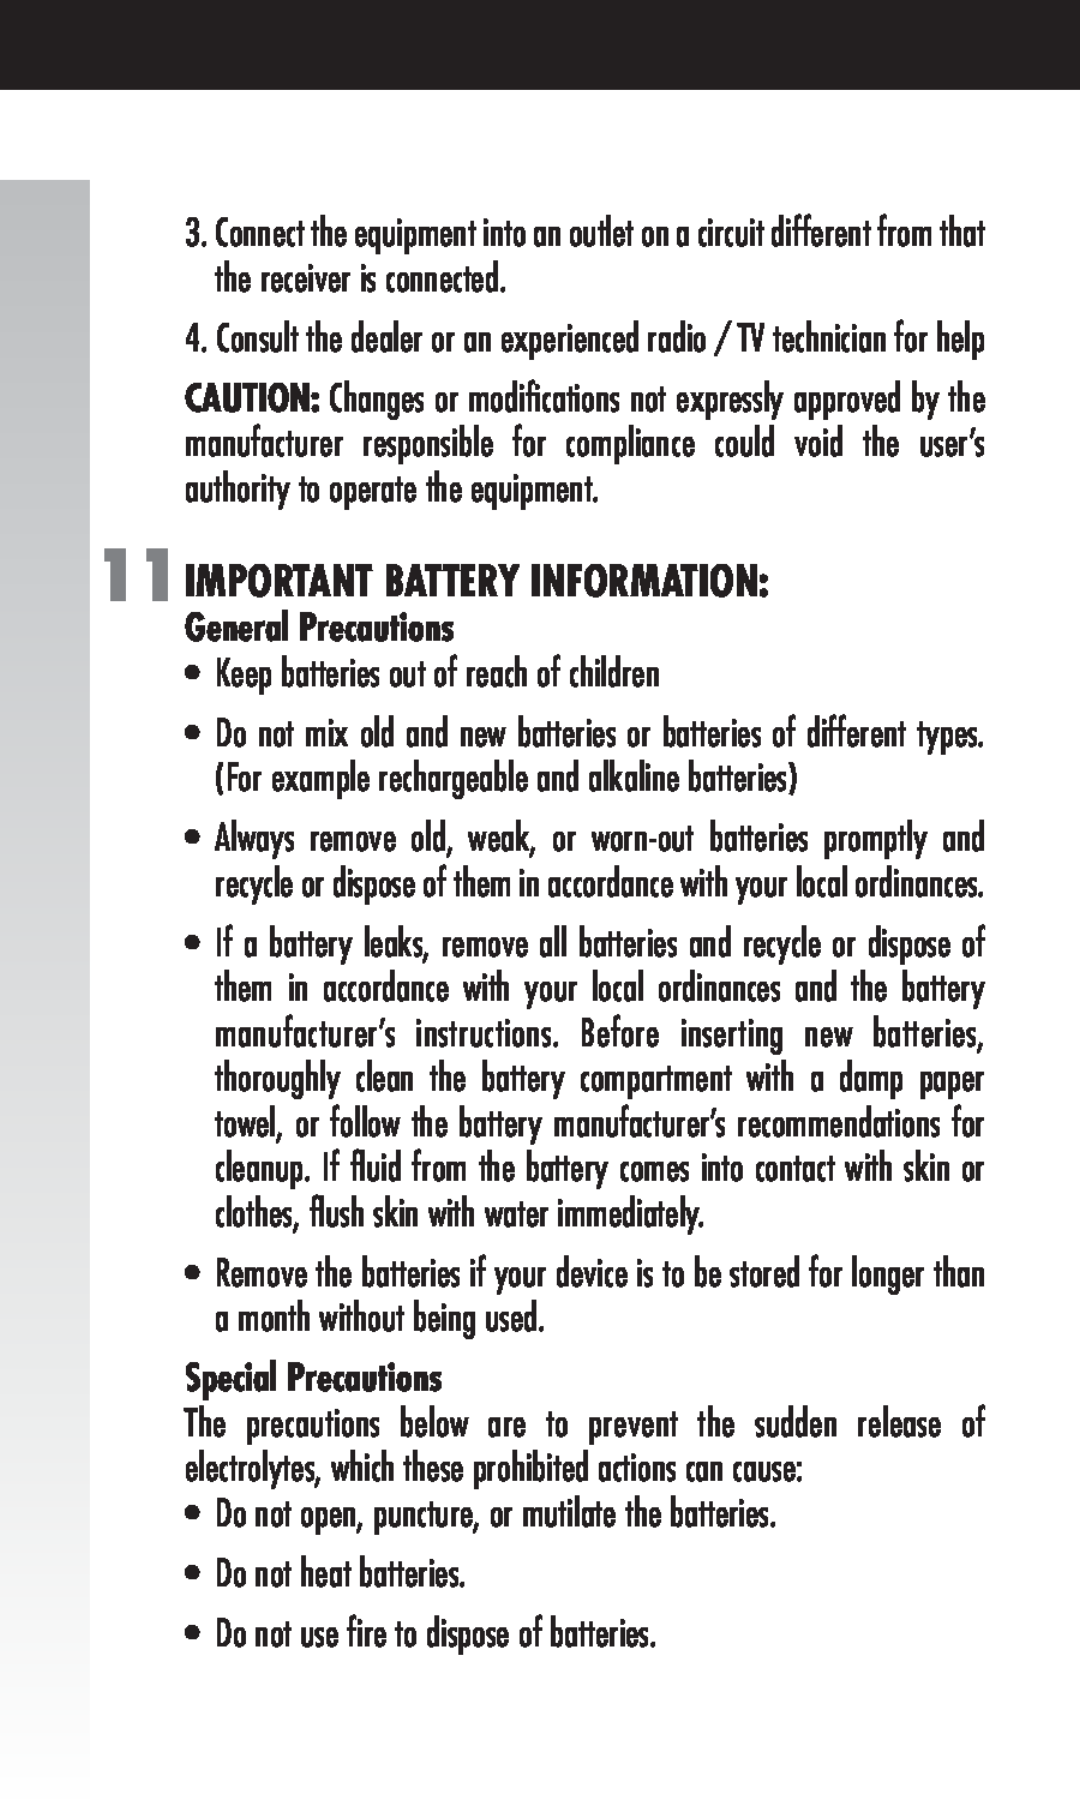 Fellowes Cordless Mouse 11IMPORTANT BATTERY INFORMATION, Keep batteries out of reach of children, General Precautions 